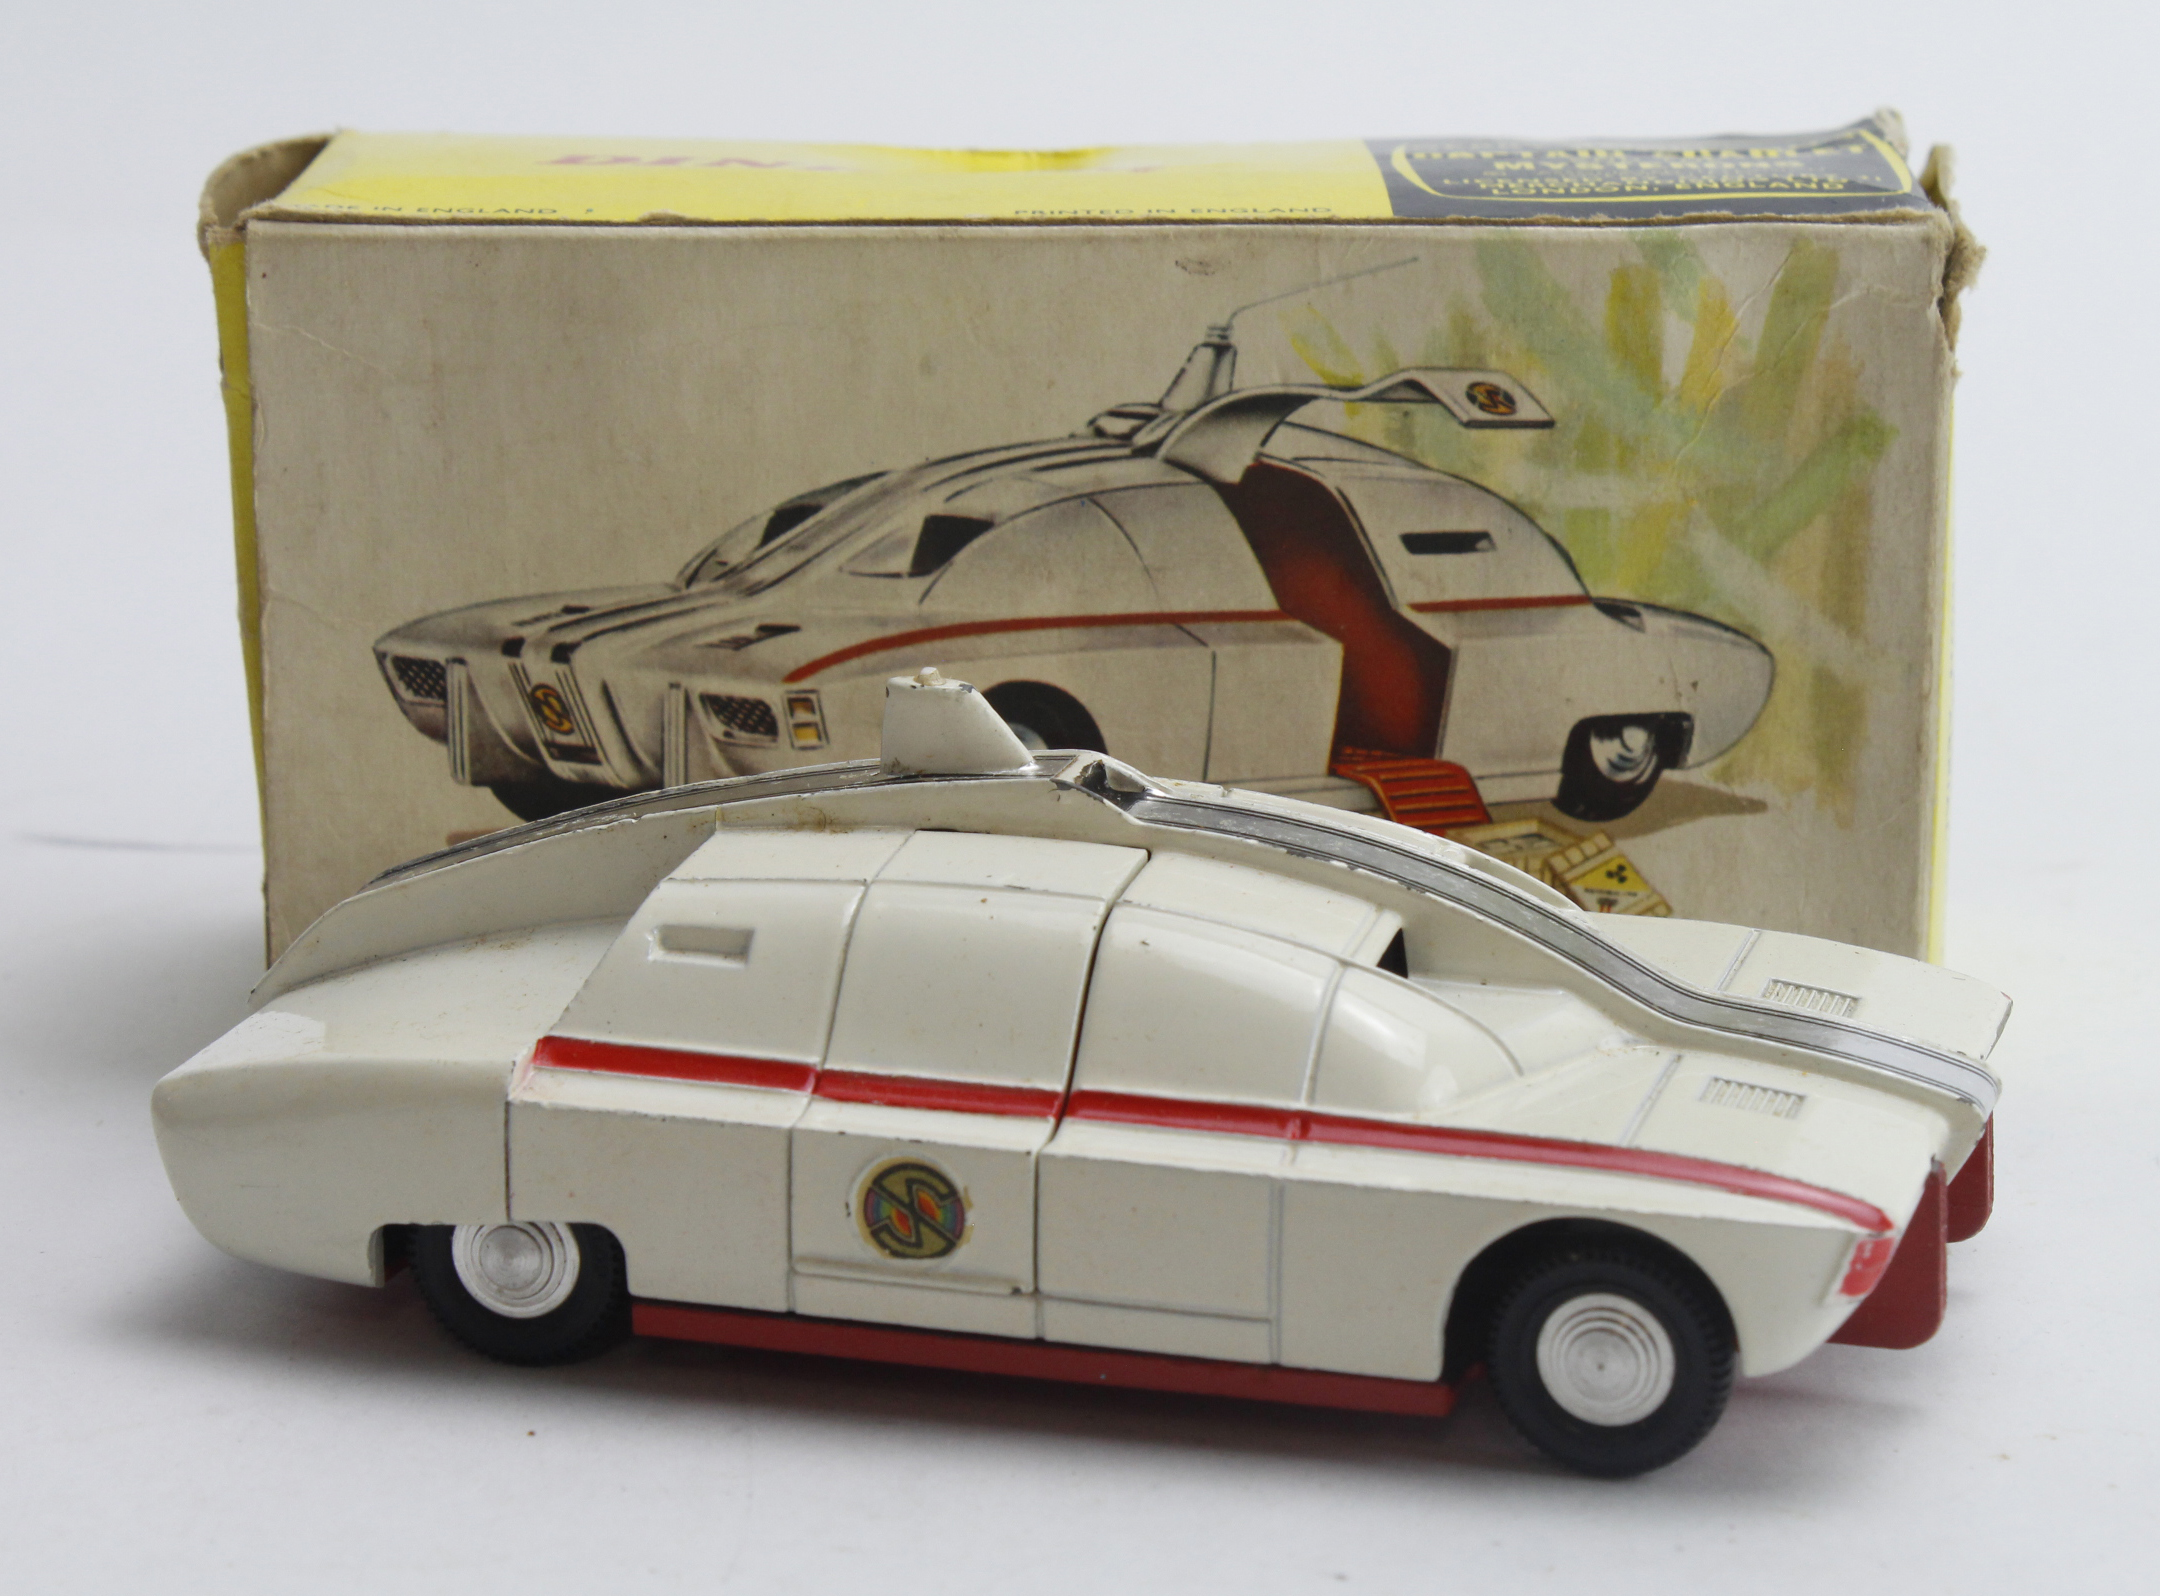 Dinky Toys, no. 105 'Captain Scarlet Maximum Security Vehicle', missing radiation box and aerial,